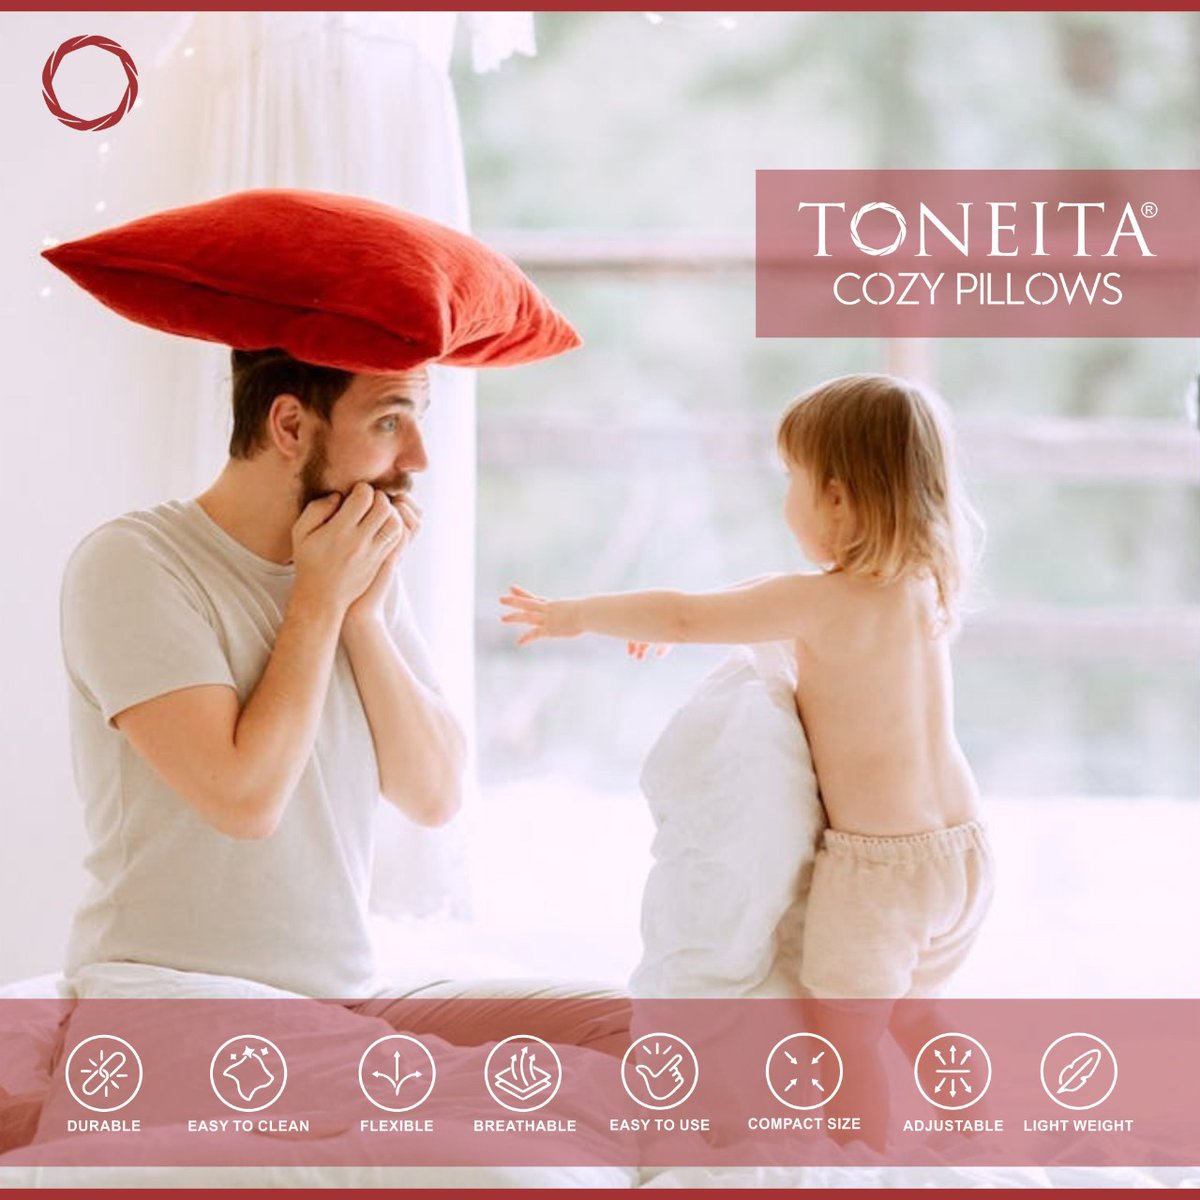 Quality time with your family is the greatest sanity.

THINK COMFORT | THINK TONEITA | 

#toneita #pillows #cushions #maternitypillow #nursingpillow #cuddlepillow #cozypillow #comfycushion #meditationcushion #circular #relaxed #bettersleep